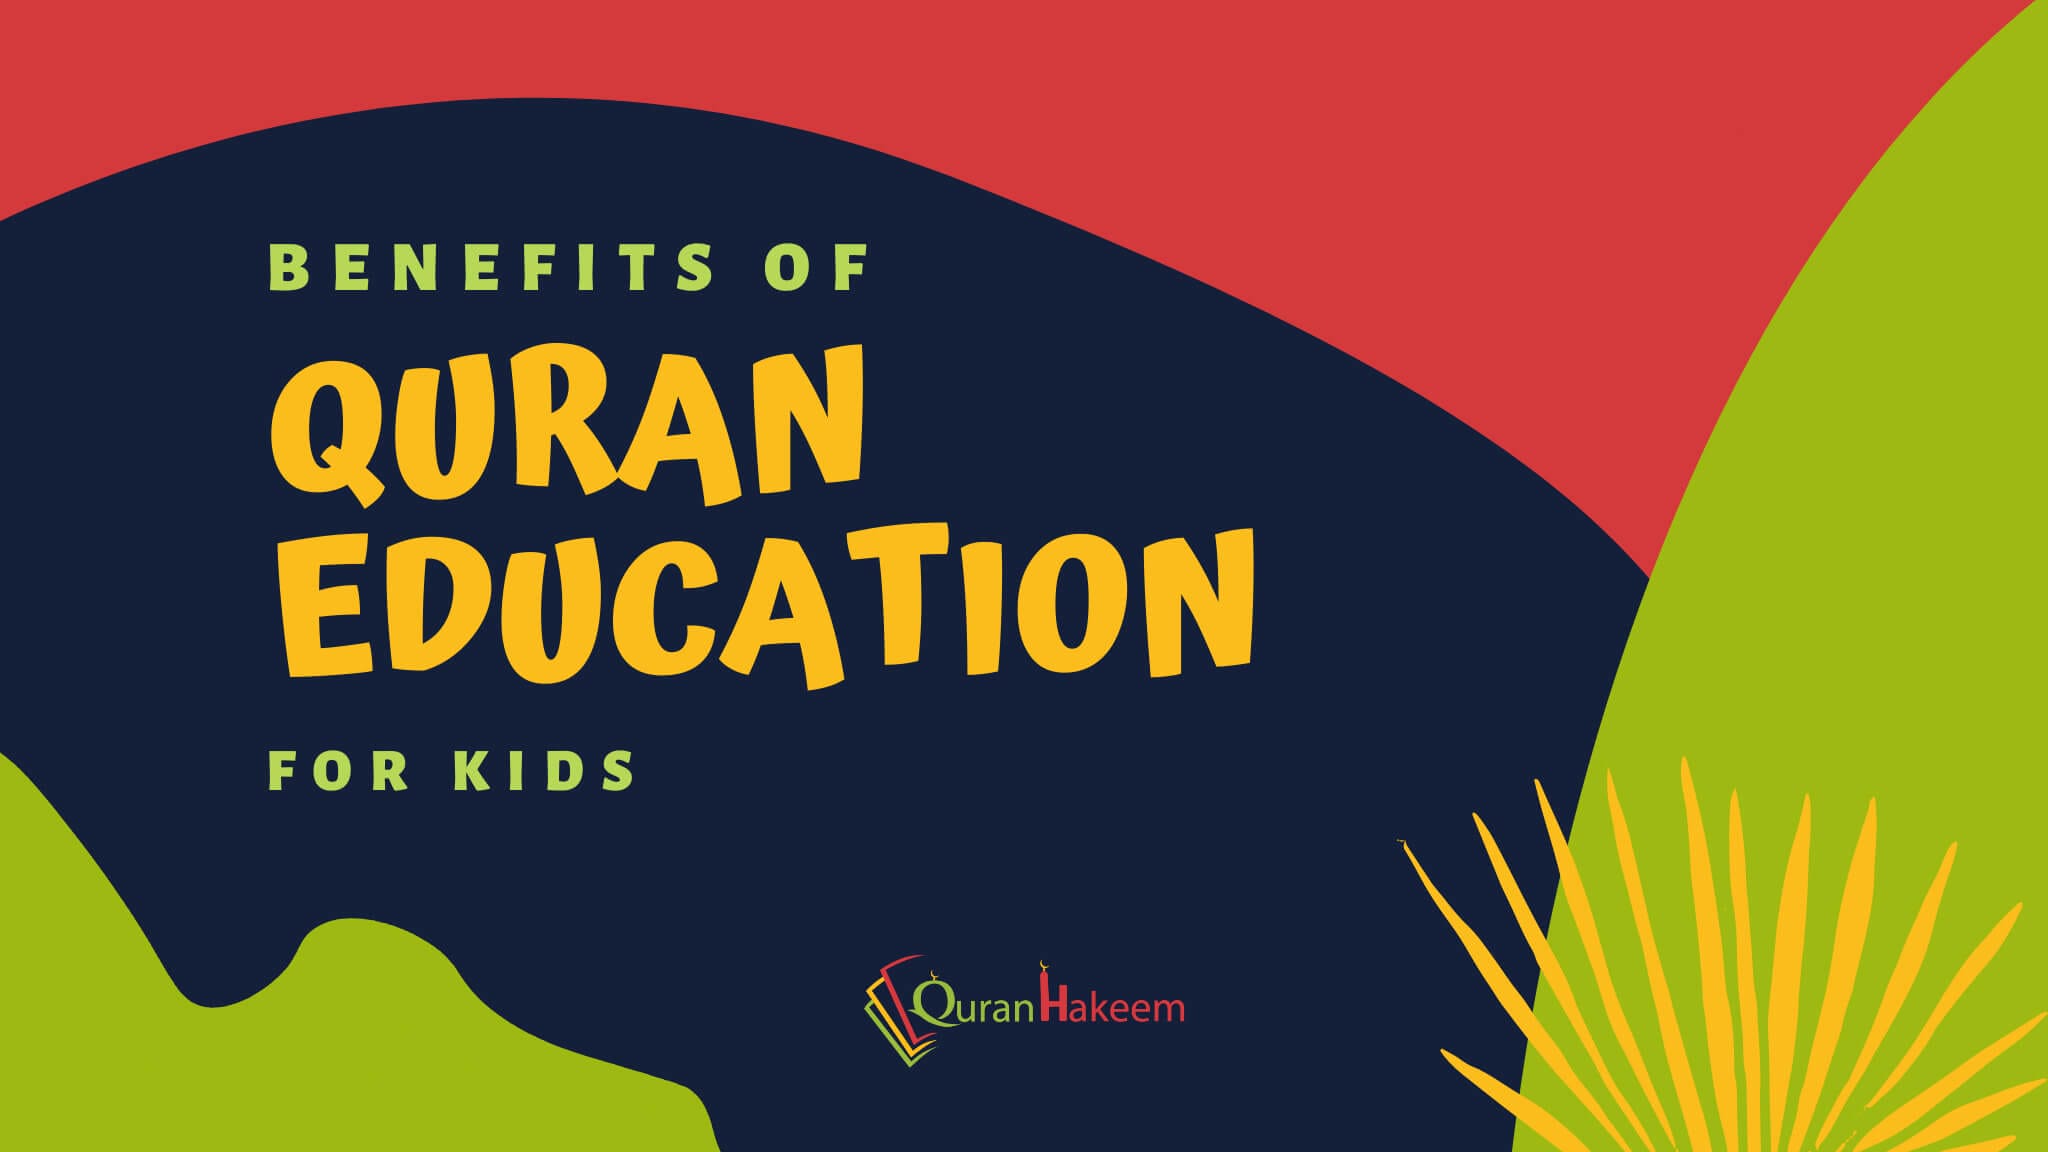 Benefits of Quran Education for kids